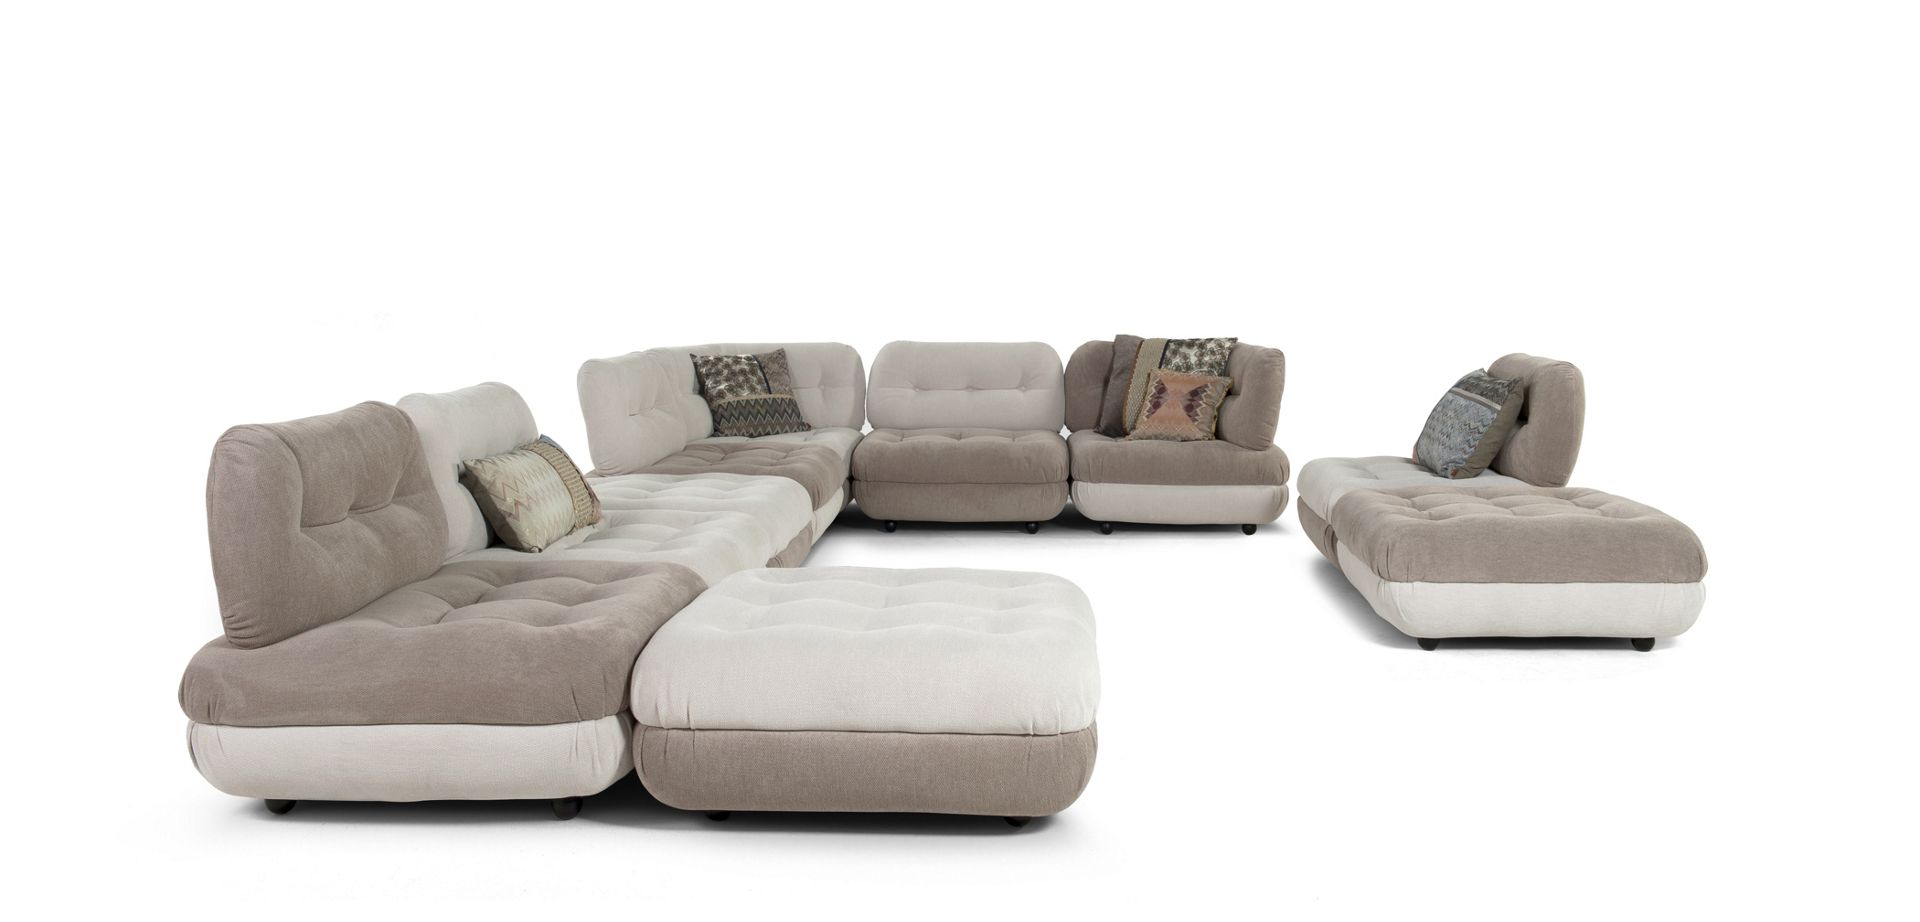 modular sofa by elements - color version image number 12